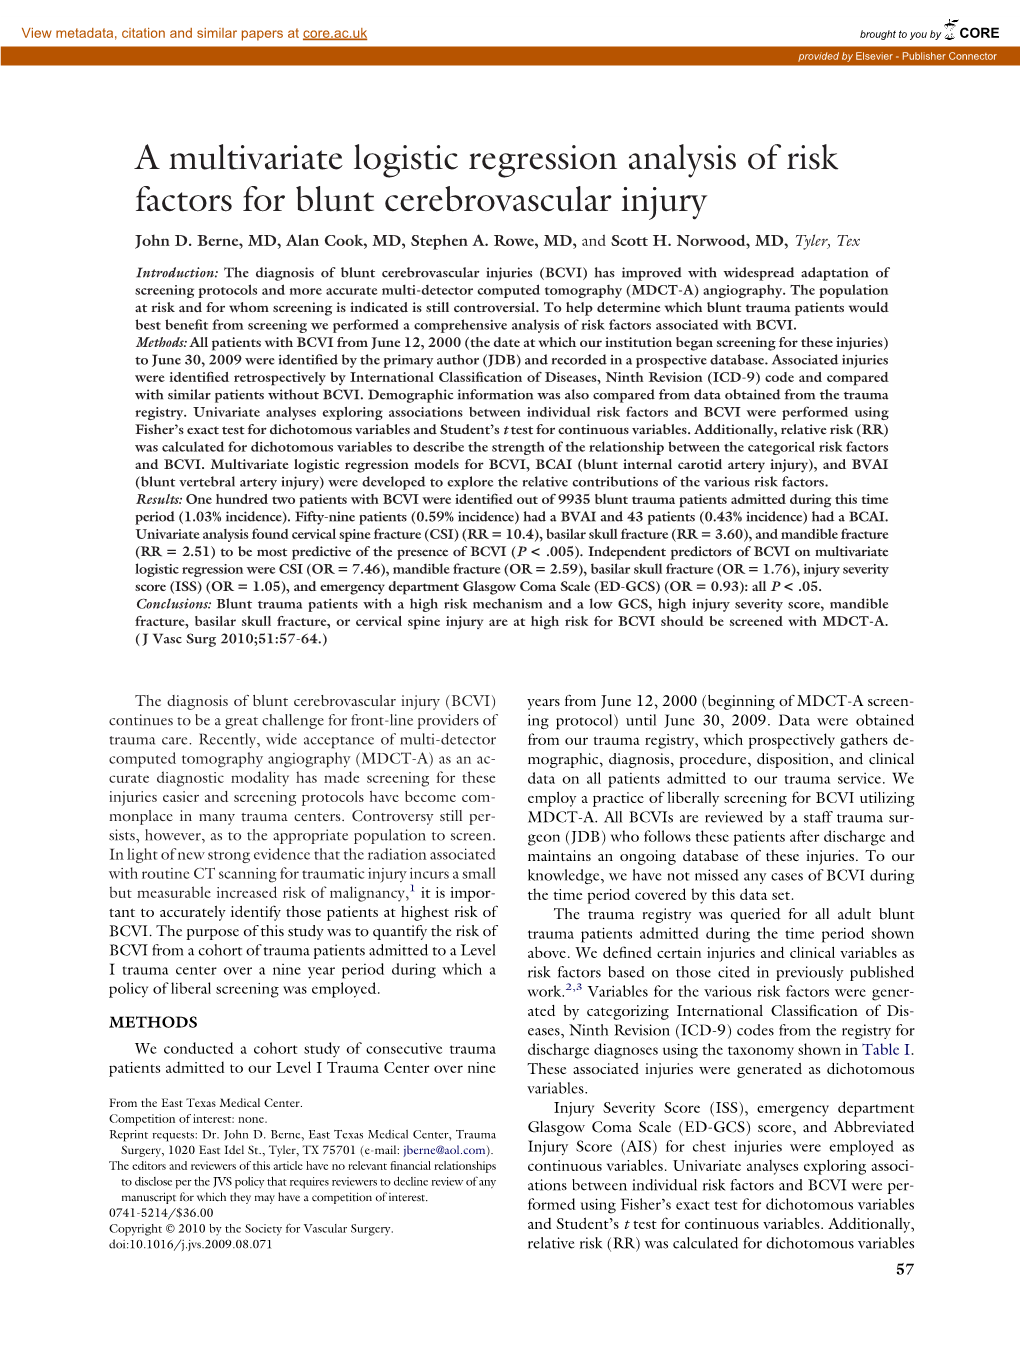 A Multivariate Logistic Regression Analysis of Risk Factors for Blunt Cerebrovascular Injury John D